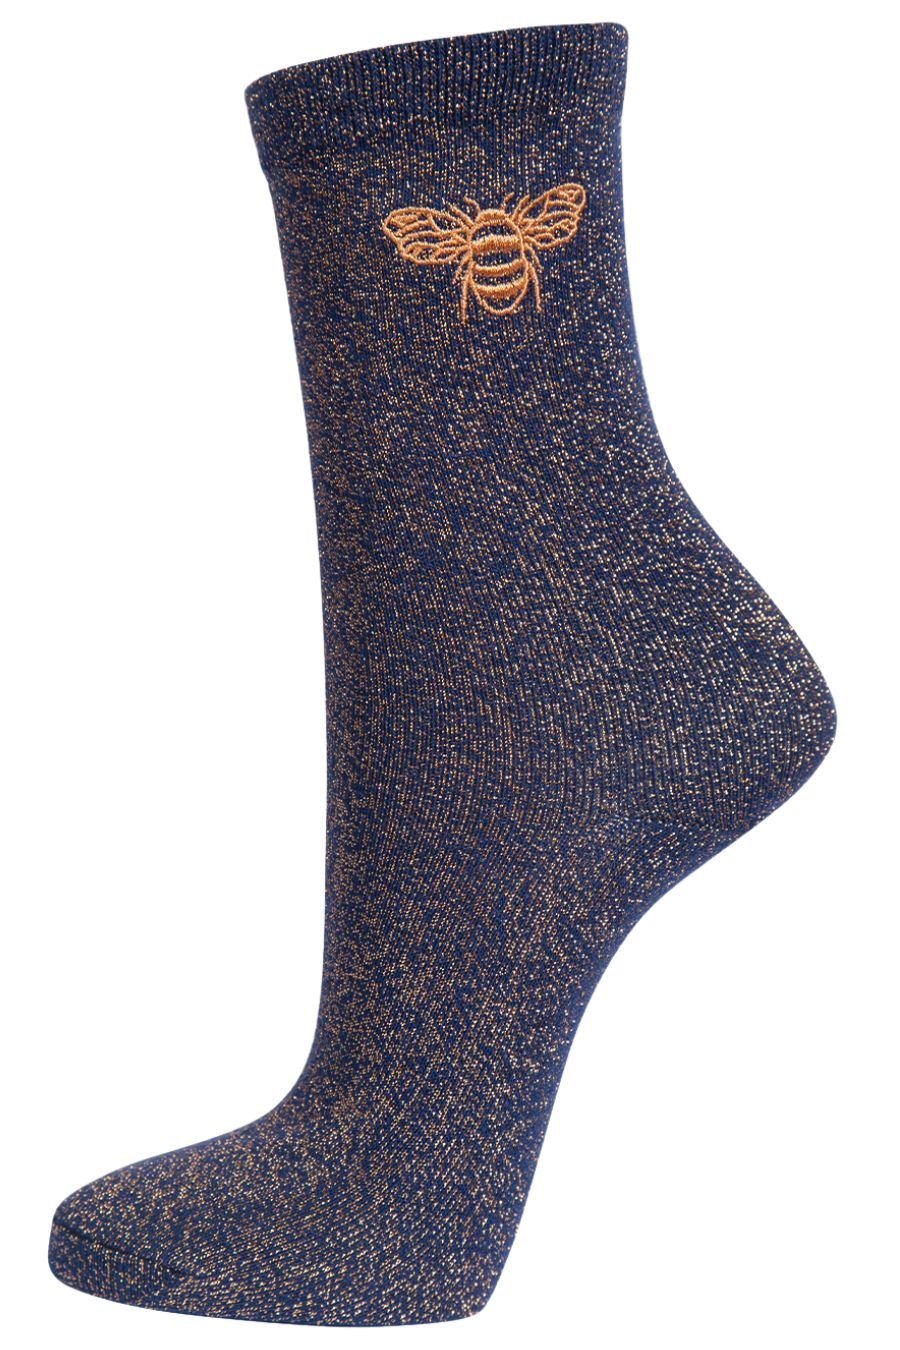 navy blue and gold glitter socks with an embroidered bee on the ankle